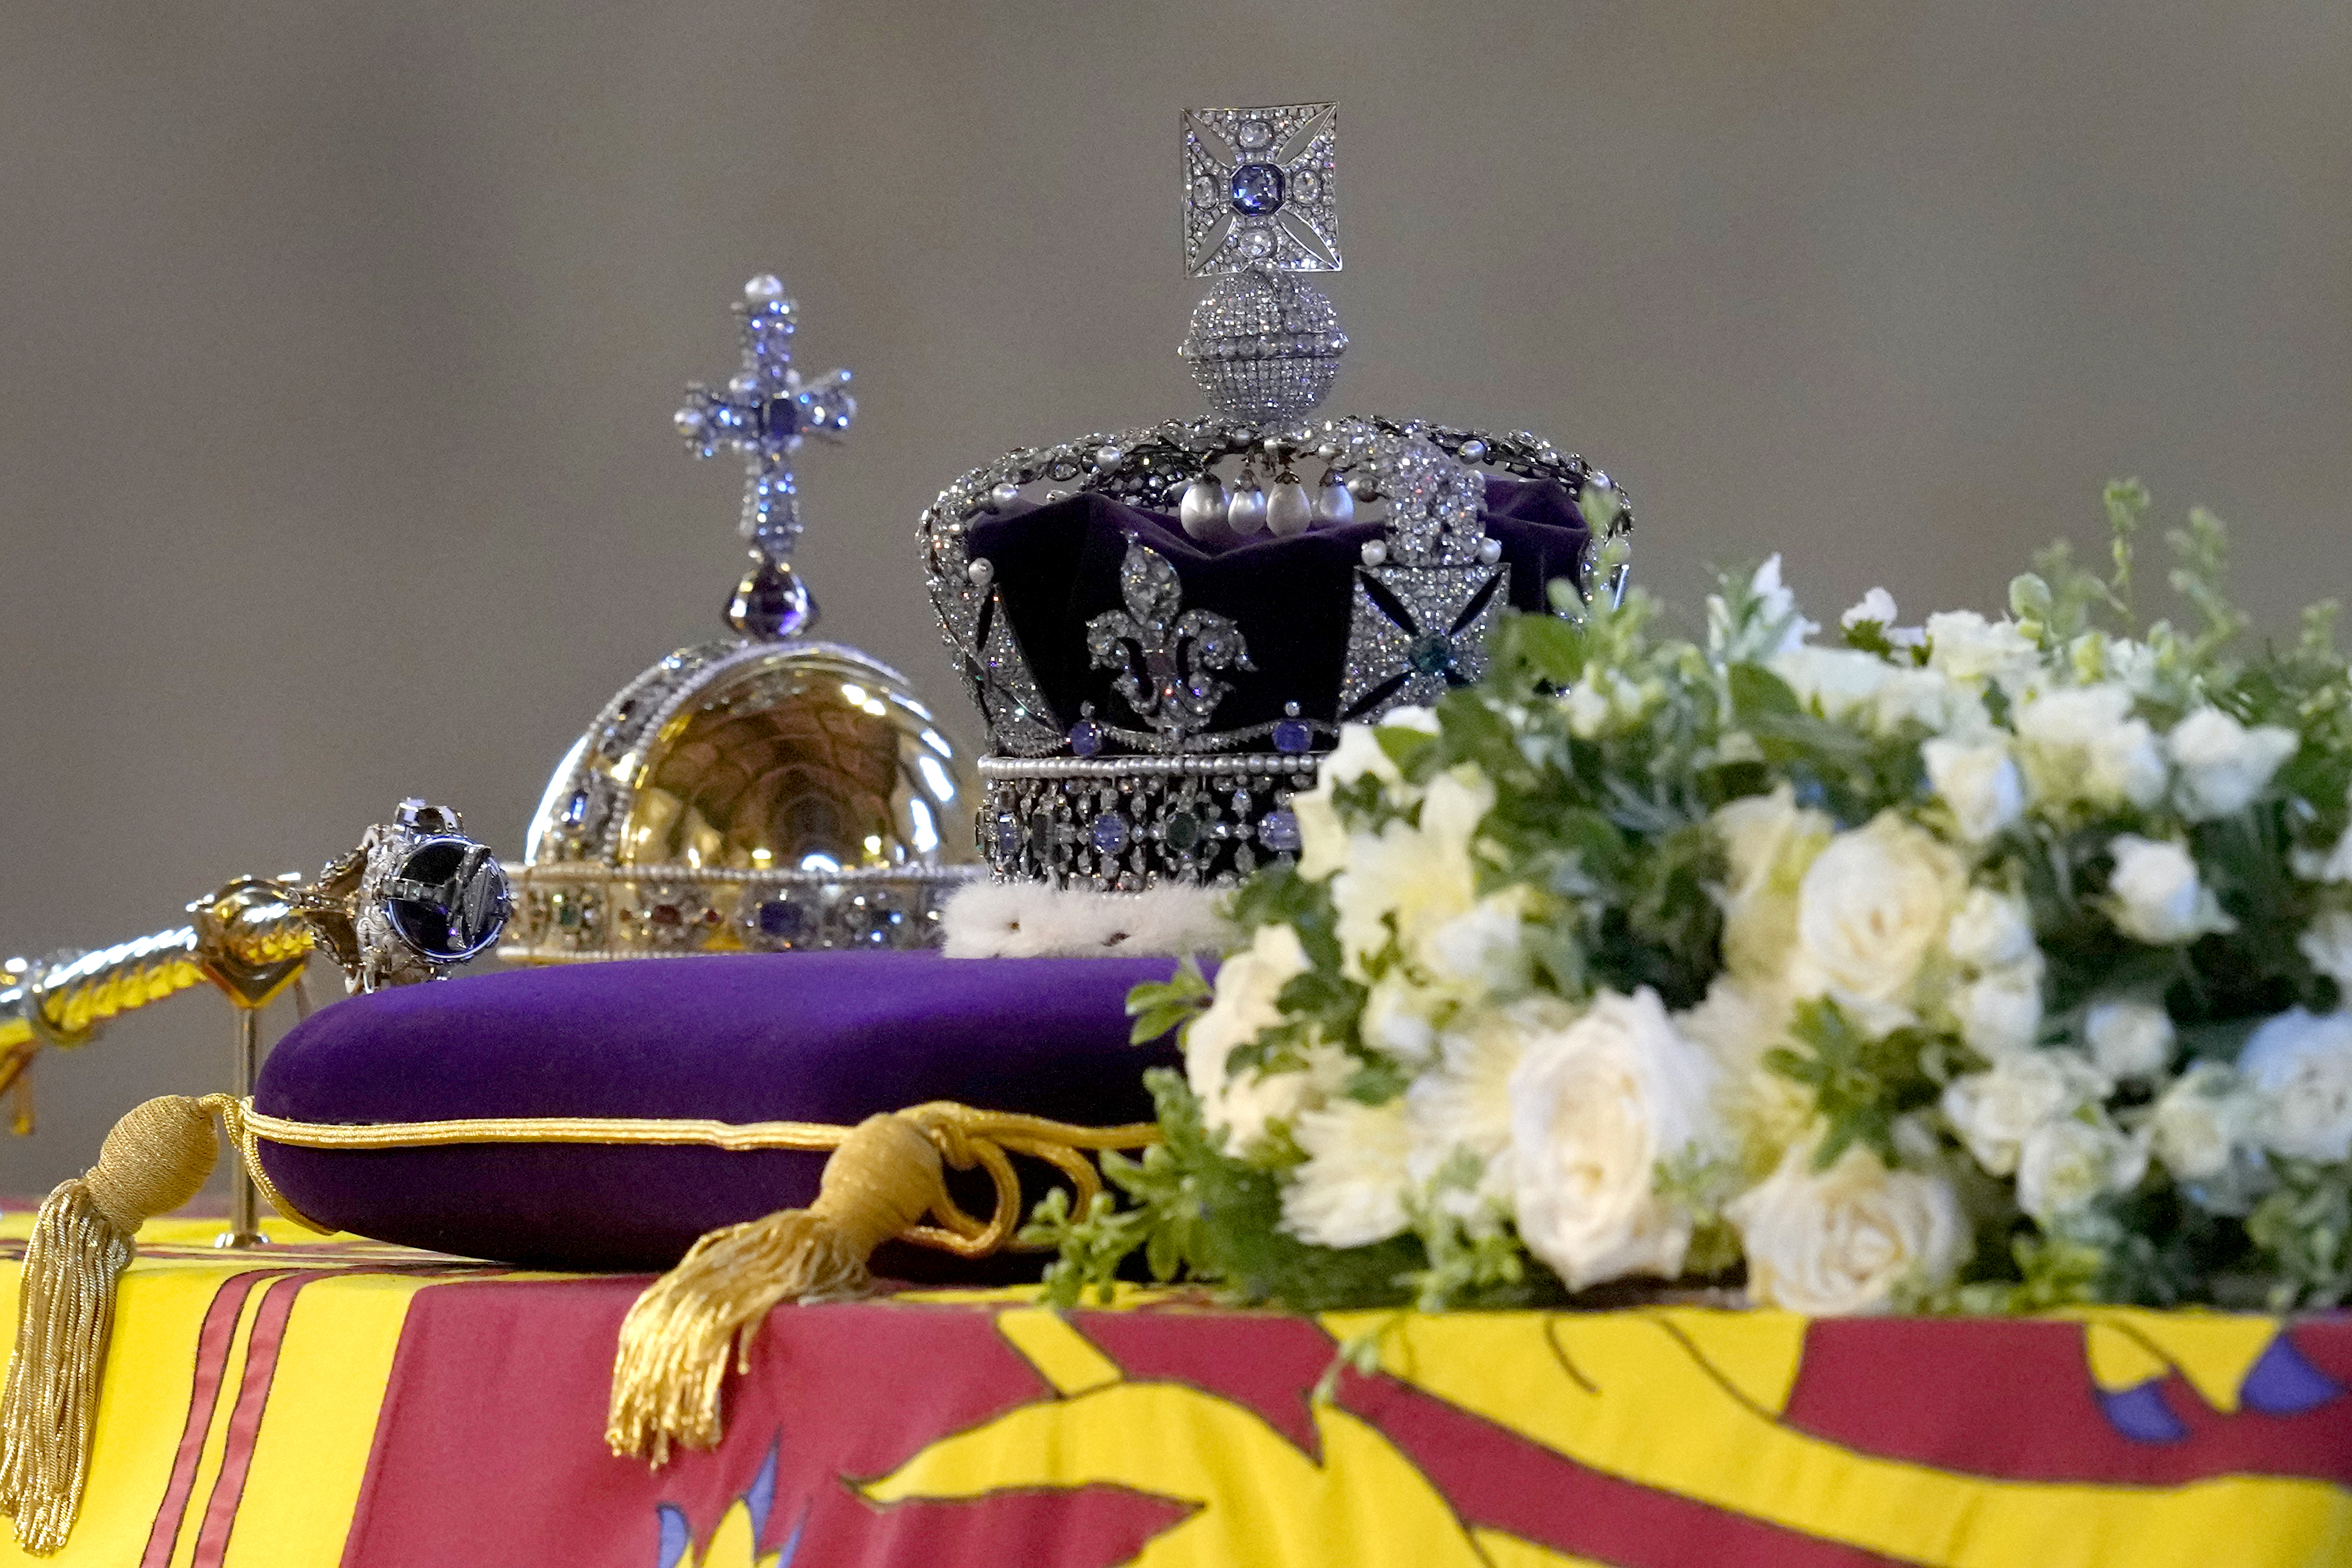 <p>Here's a closer look at what was on top of Her Majesty's coffin... The body of Queen Elizabeth II, her casket draped in the Royal Standard with the Imperial State Crown and the Sovereign's Orb and Sceptre sitting on top, lie in state on a catafalque as members of the public filed past in London's Westminster Hall at the Palace of Westminster on Sept. 16, 2022, ahead of <a href="https://www.wonderwall.com/celebrity/royals/best-photos-from-queen-elizabeth-ii-funeral-king-charles-princes-william-prince-harry-george-charlotte-kate-meghan652347.gallery">her funeral</a> three days later. </p>